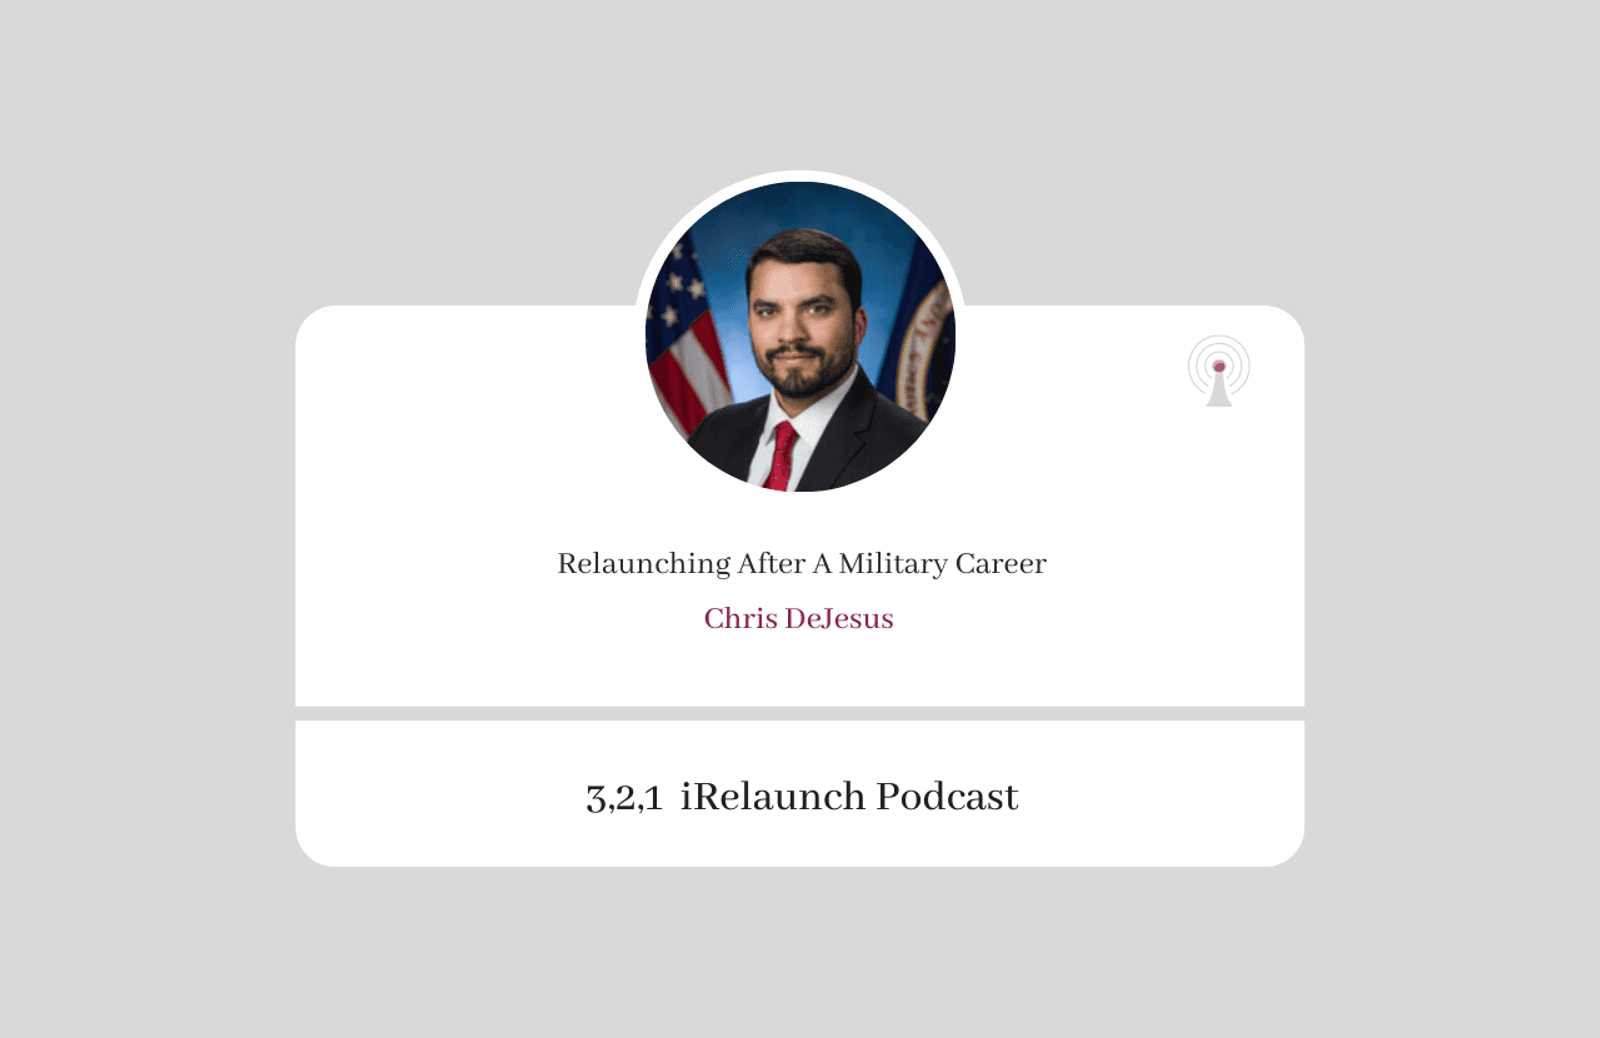 3, 2, 1 iRelaunch Podcast Thumbnail for Episode #103 with Chris DeJesus' headshot. The episode's title is: "Relaunching After A Military Career."